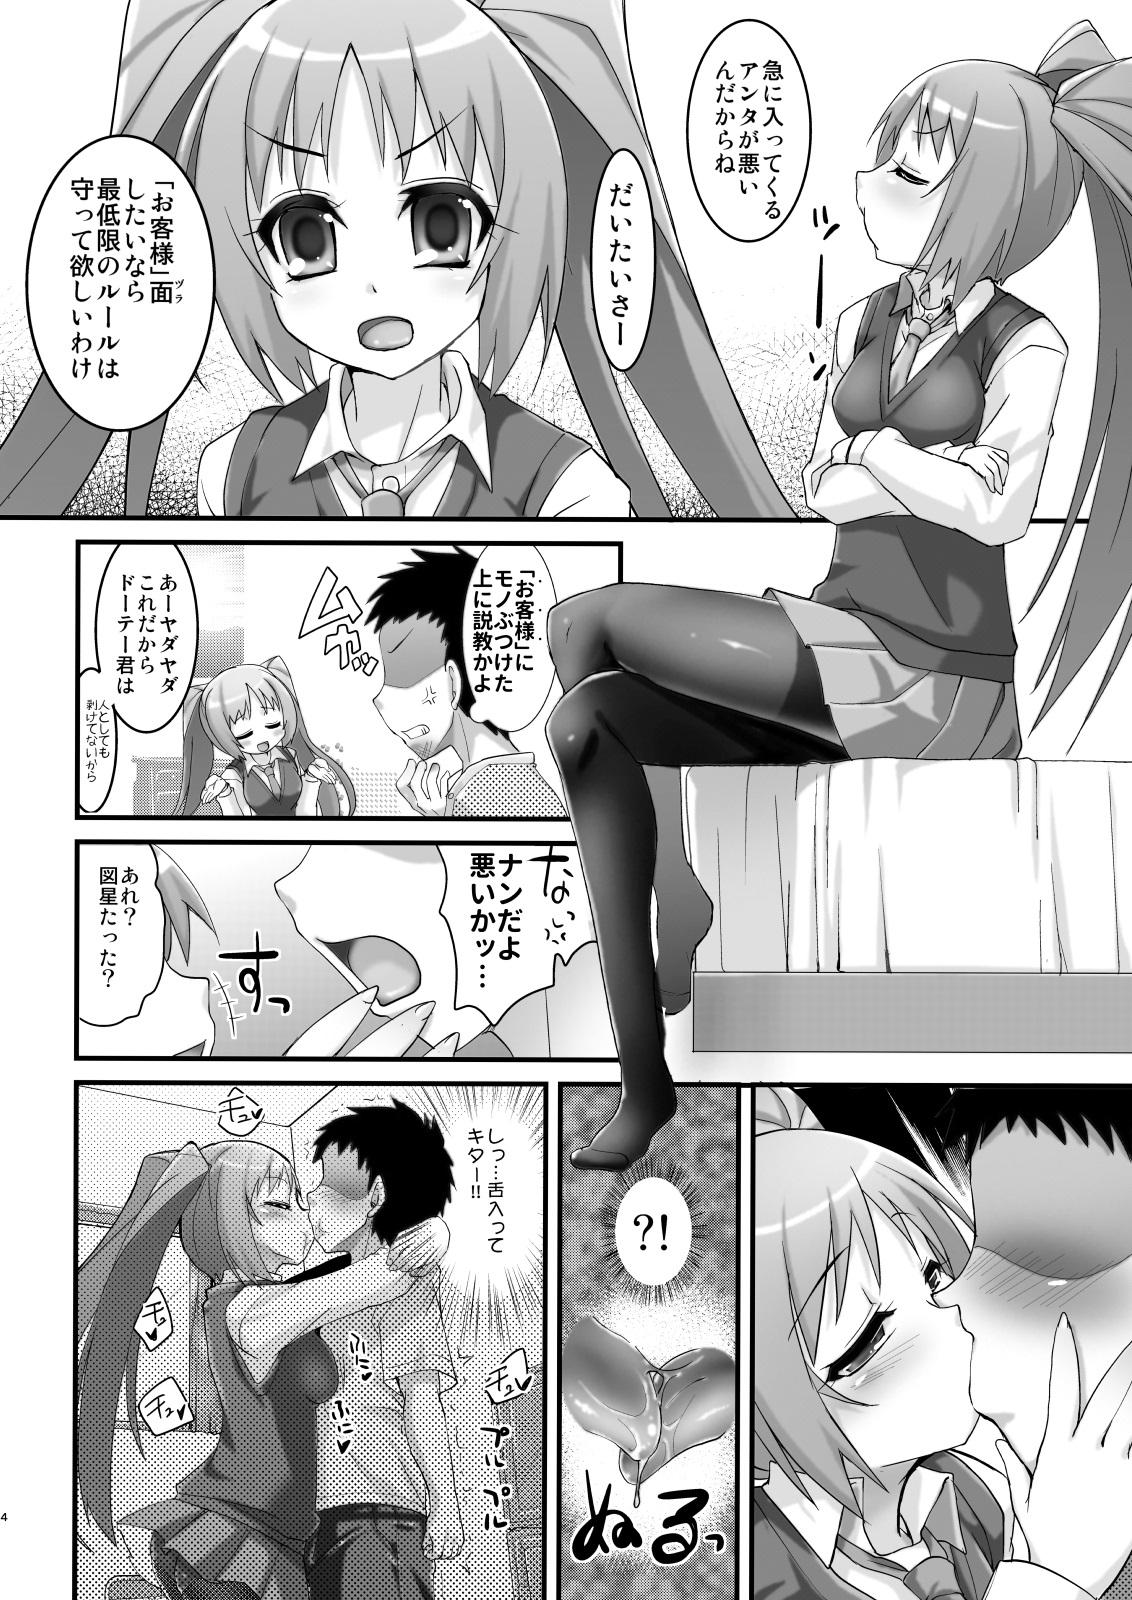 Kink Tsundere Tights to Twintails - Original Alternative - Page 4